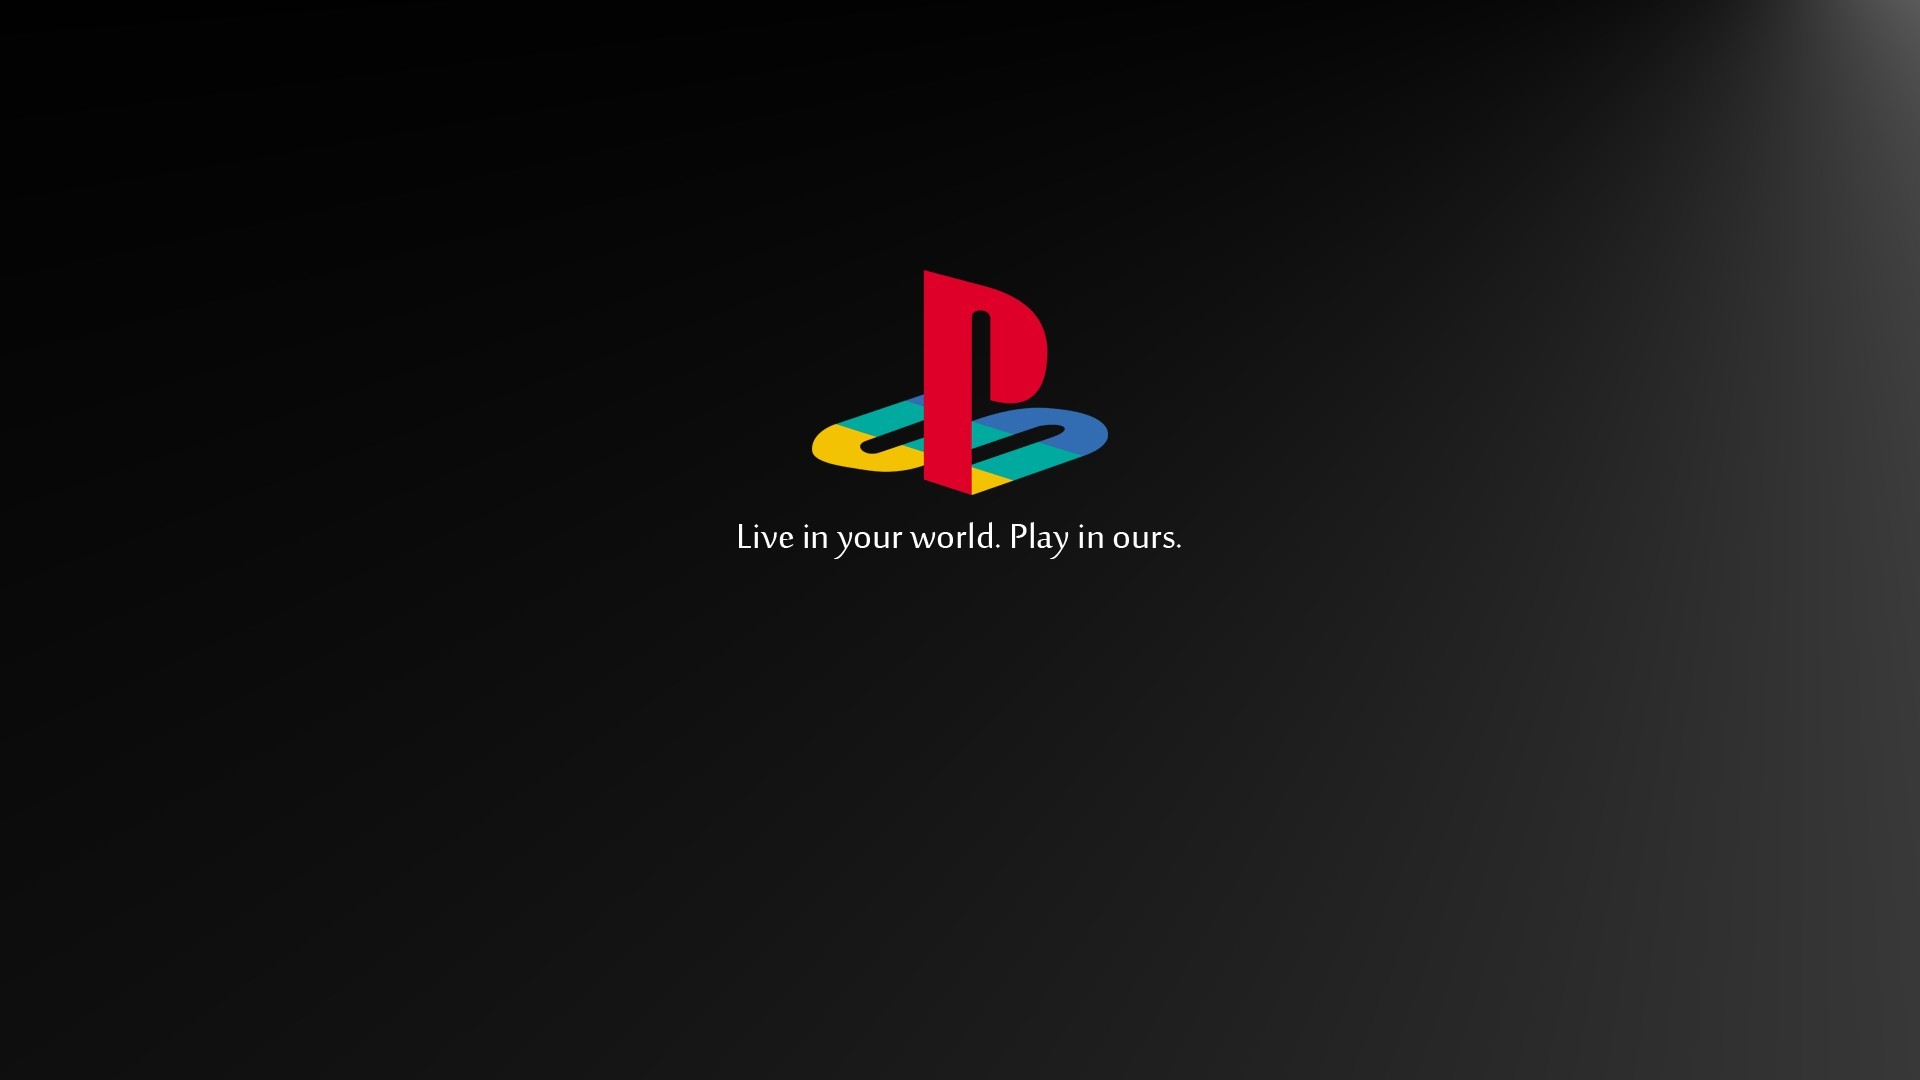 Sony PlayStation Video Games Retro Games Logo Black Consoles Console Typography 1920x1080